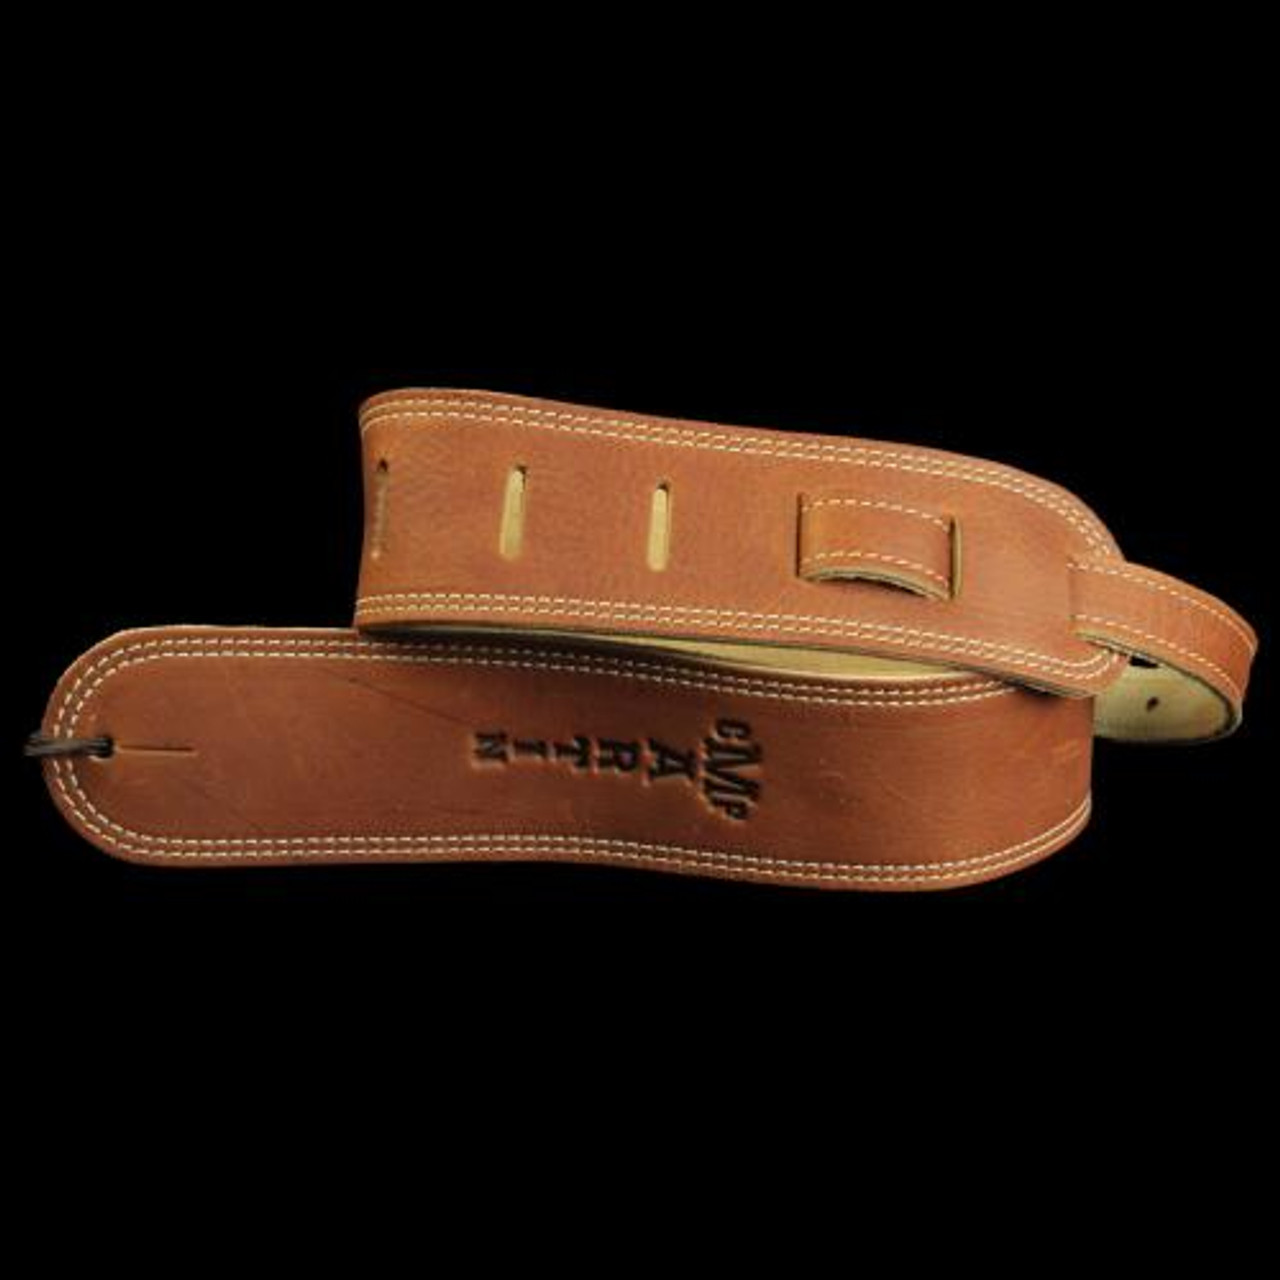 CF MARTIN 18A0065 2 1/8 Leather Guitar Strap, Brown